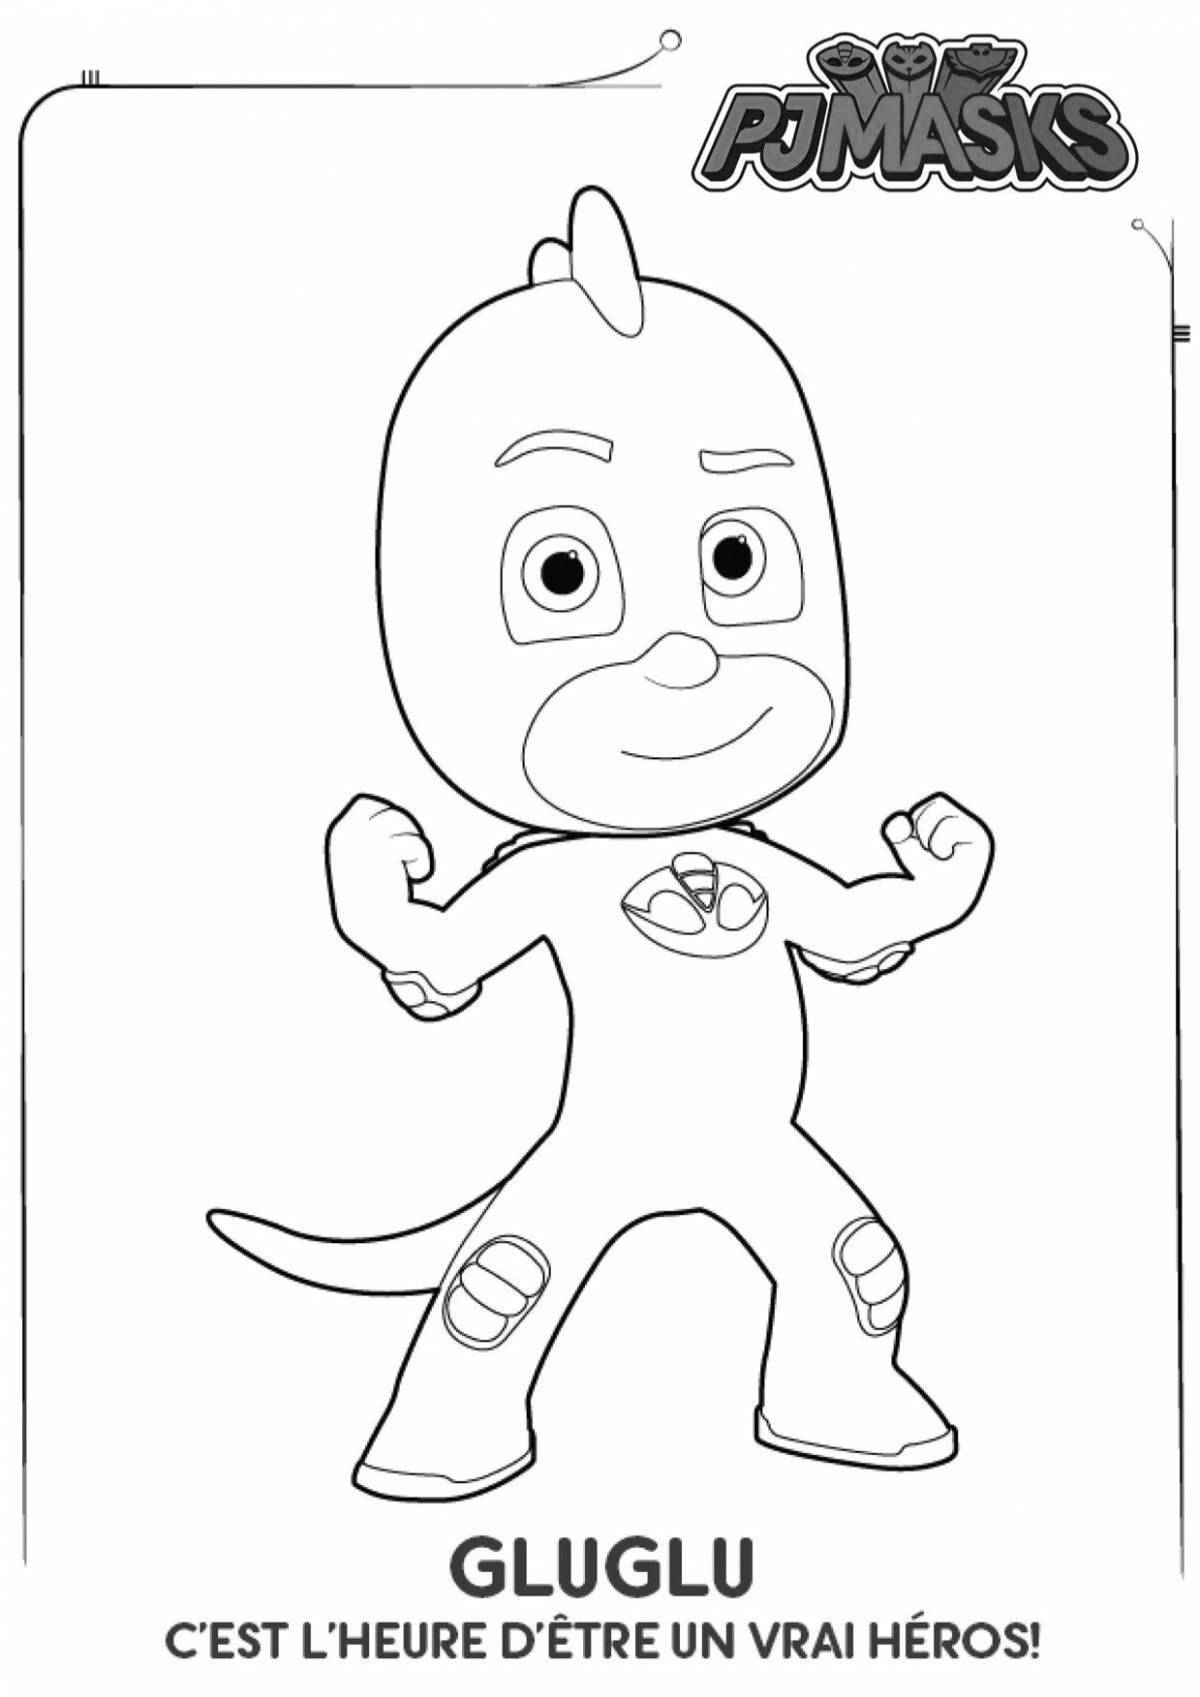 Funny gecko coloring book